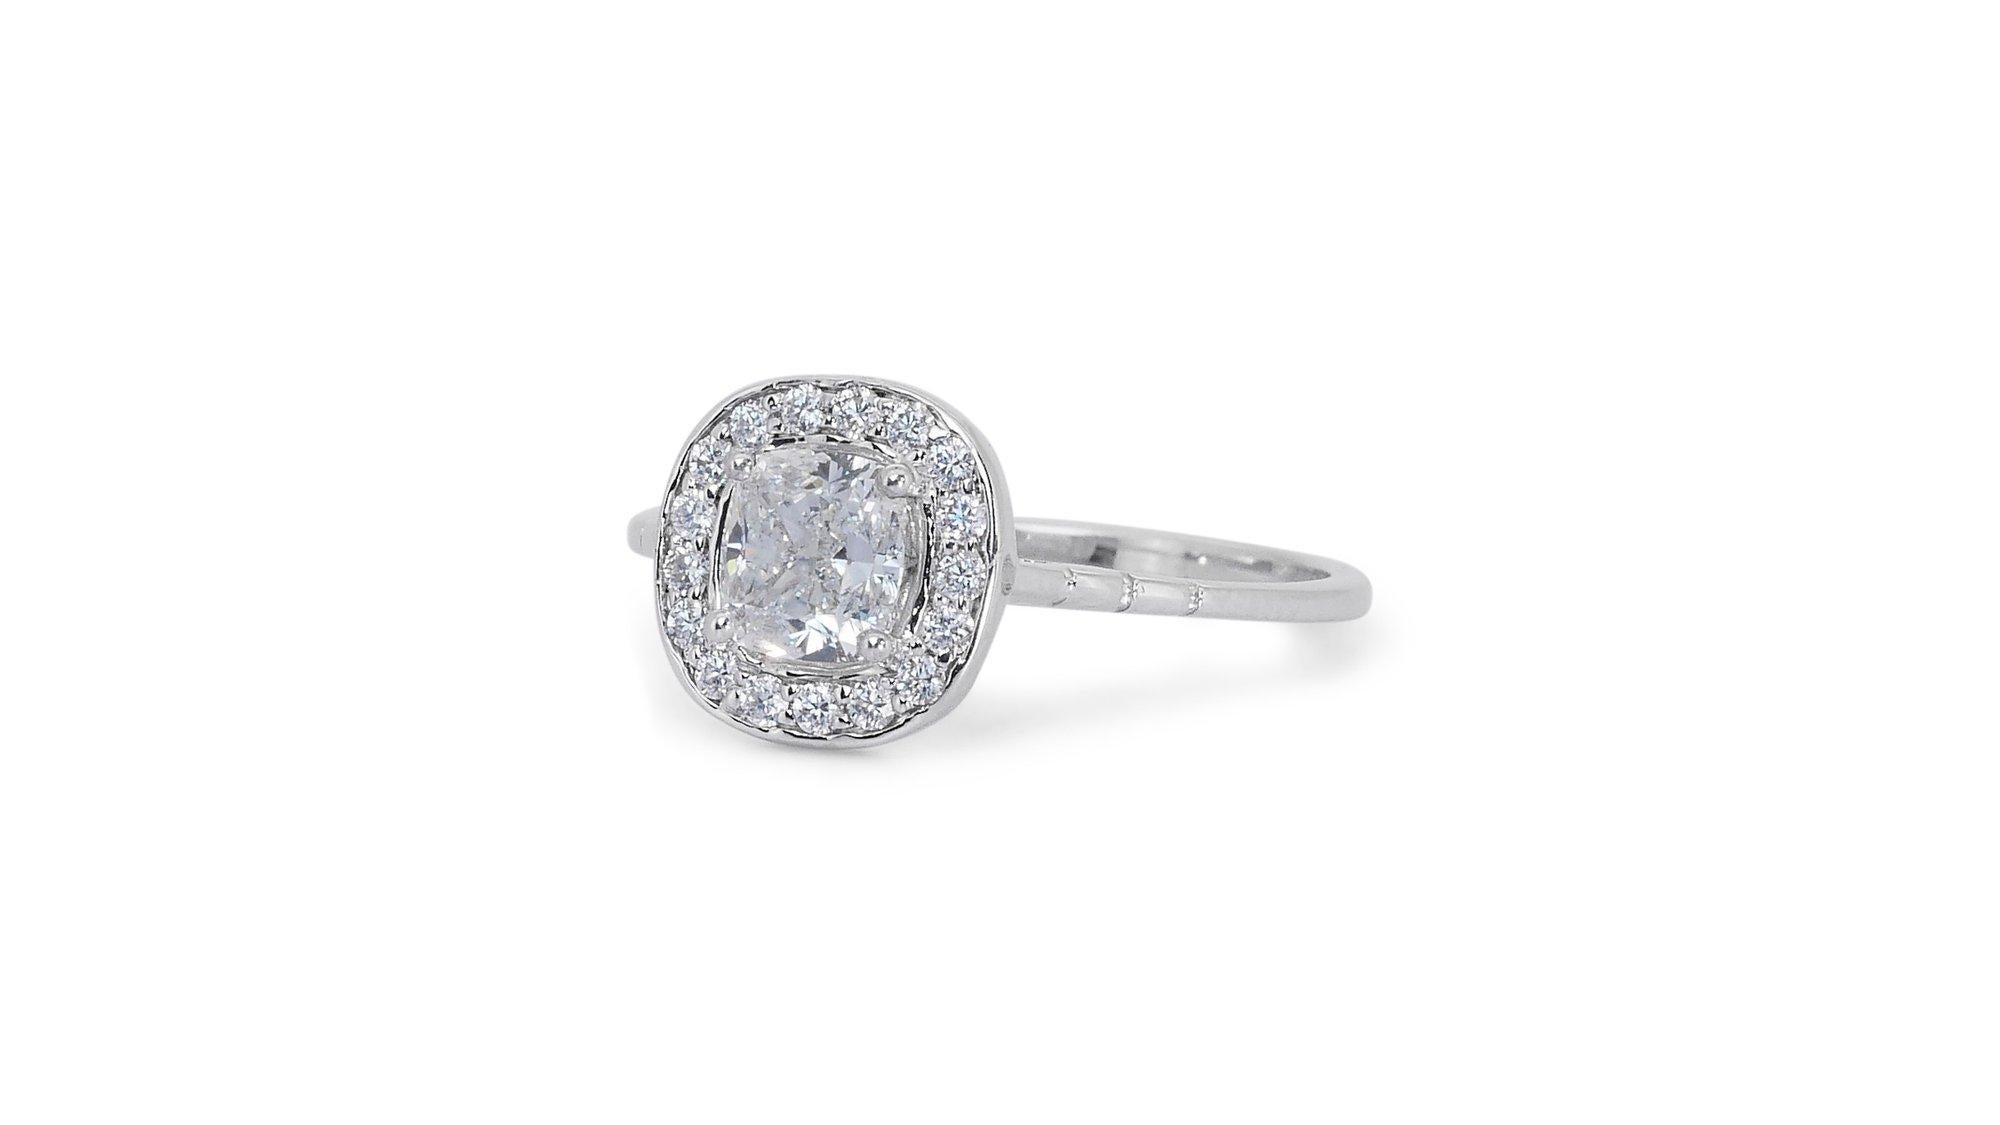 Cushion Cut Elegant 1.17ct Diamonds Halo Ring in 18k White Gold - GIA Certified For Sale